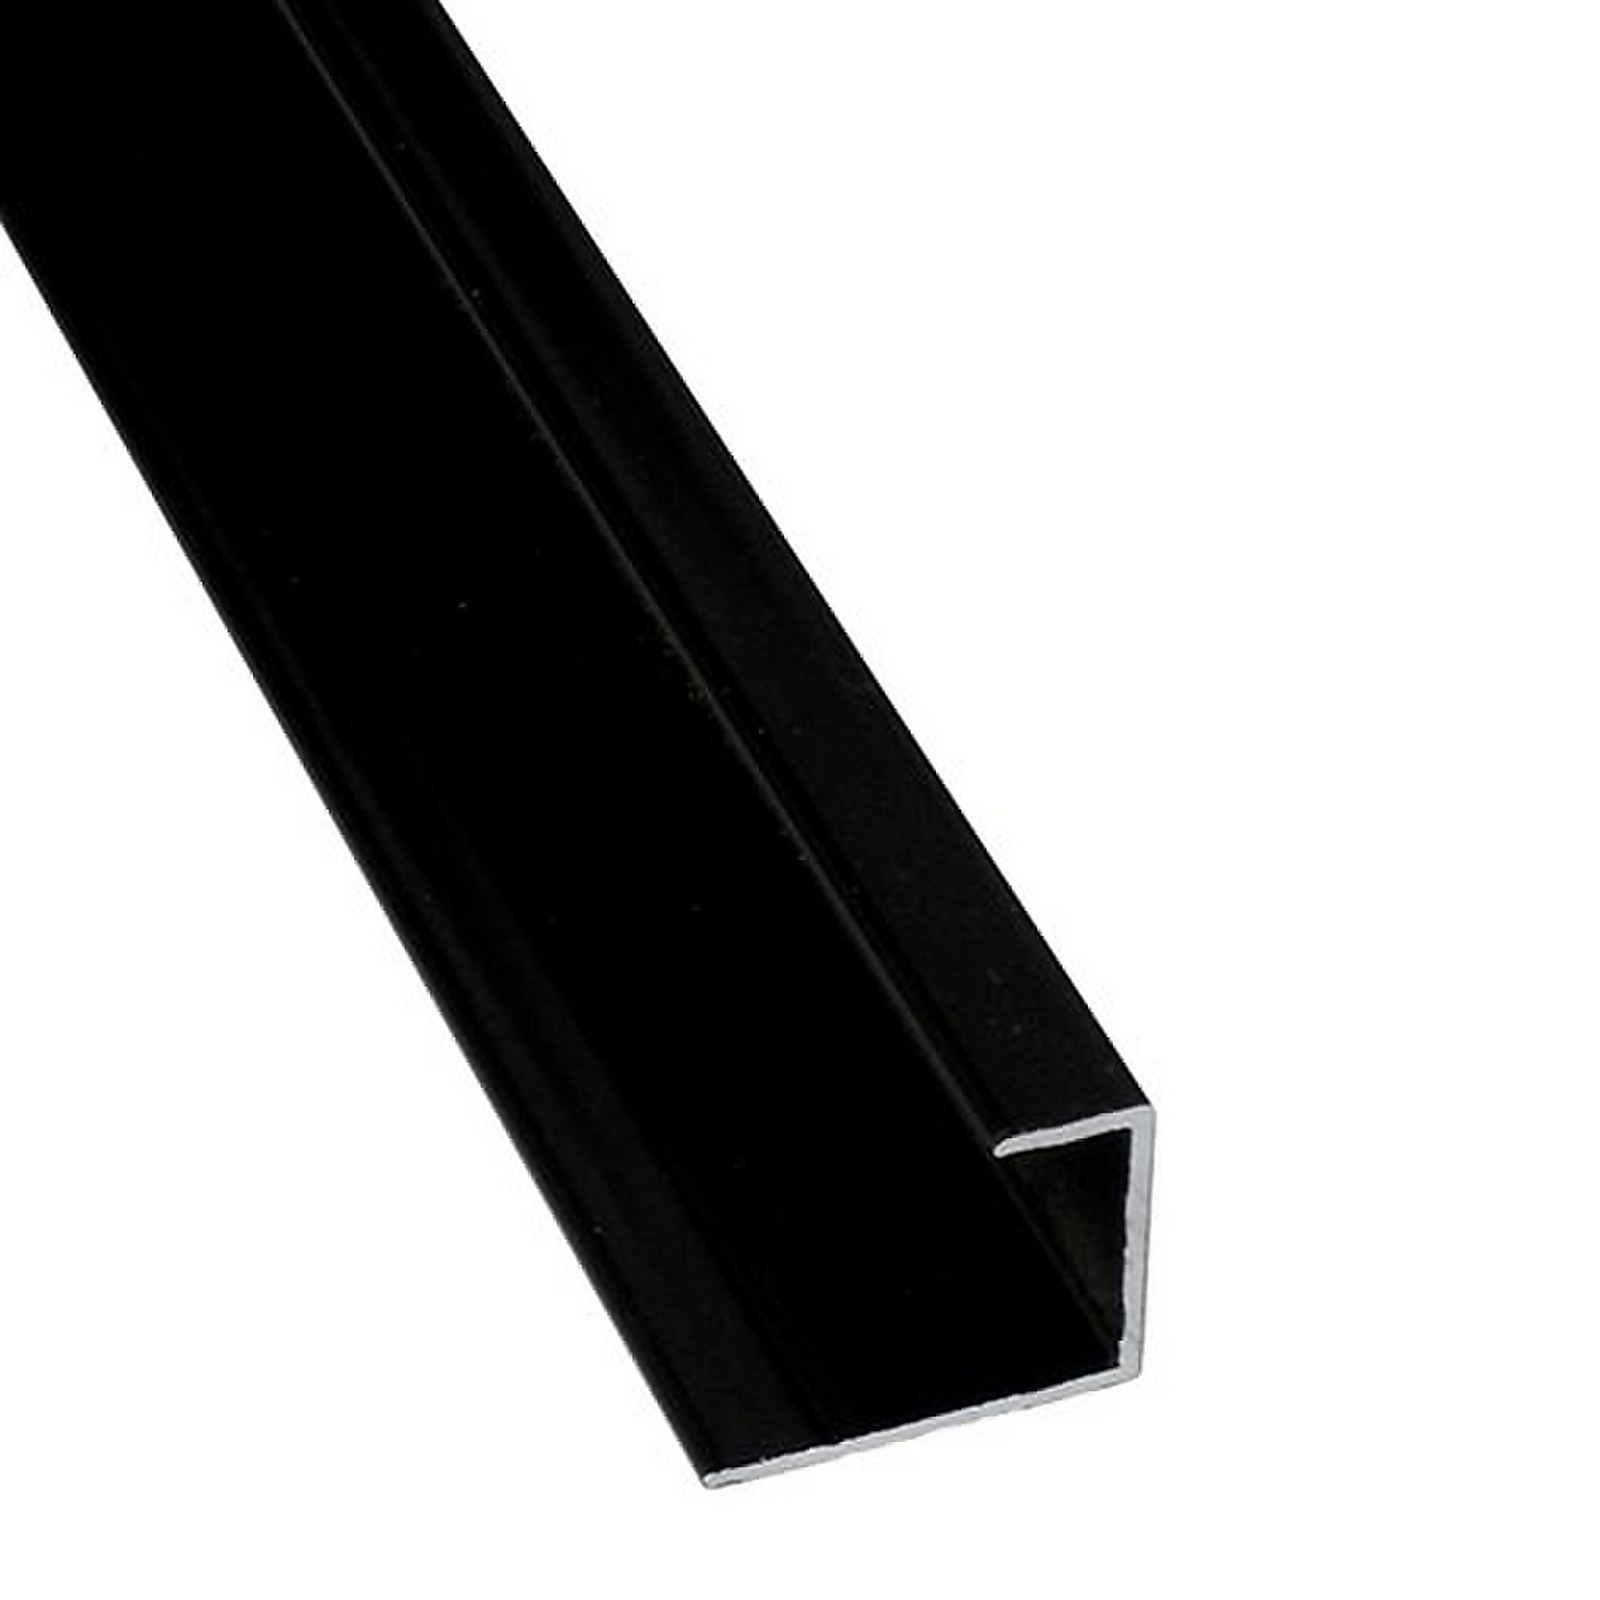 Photo of Wetwall Laminate End Cap - Black